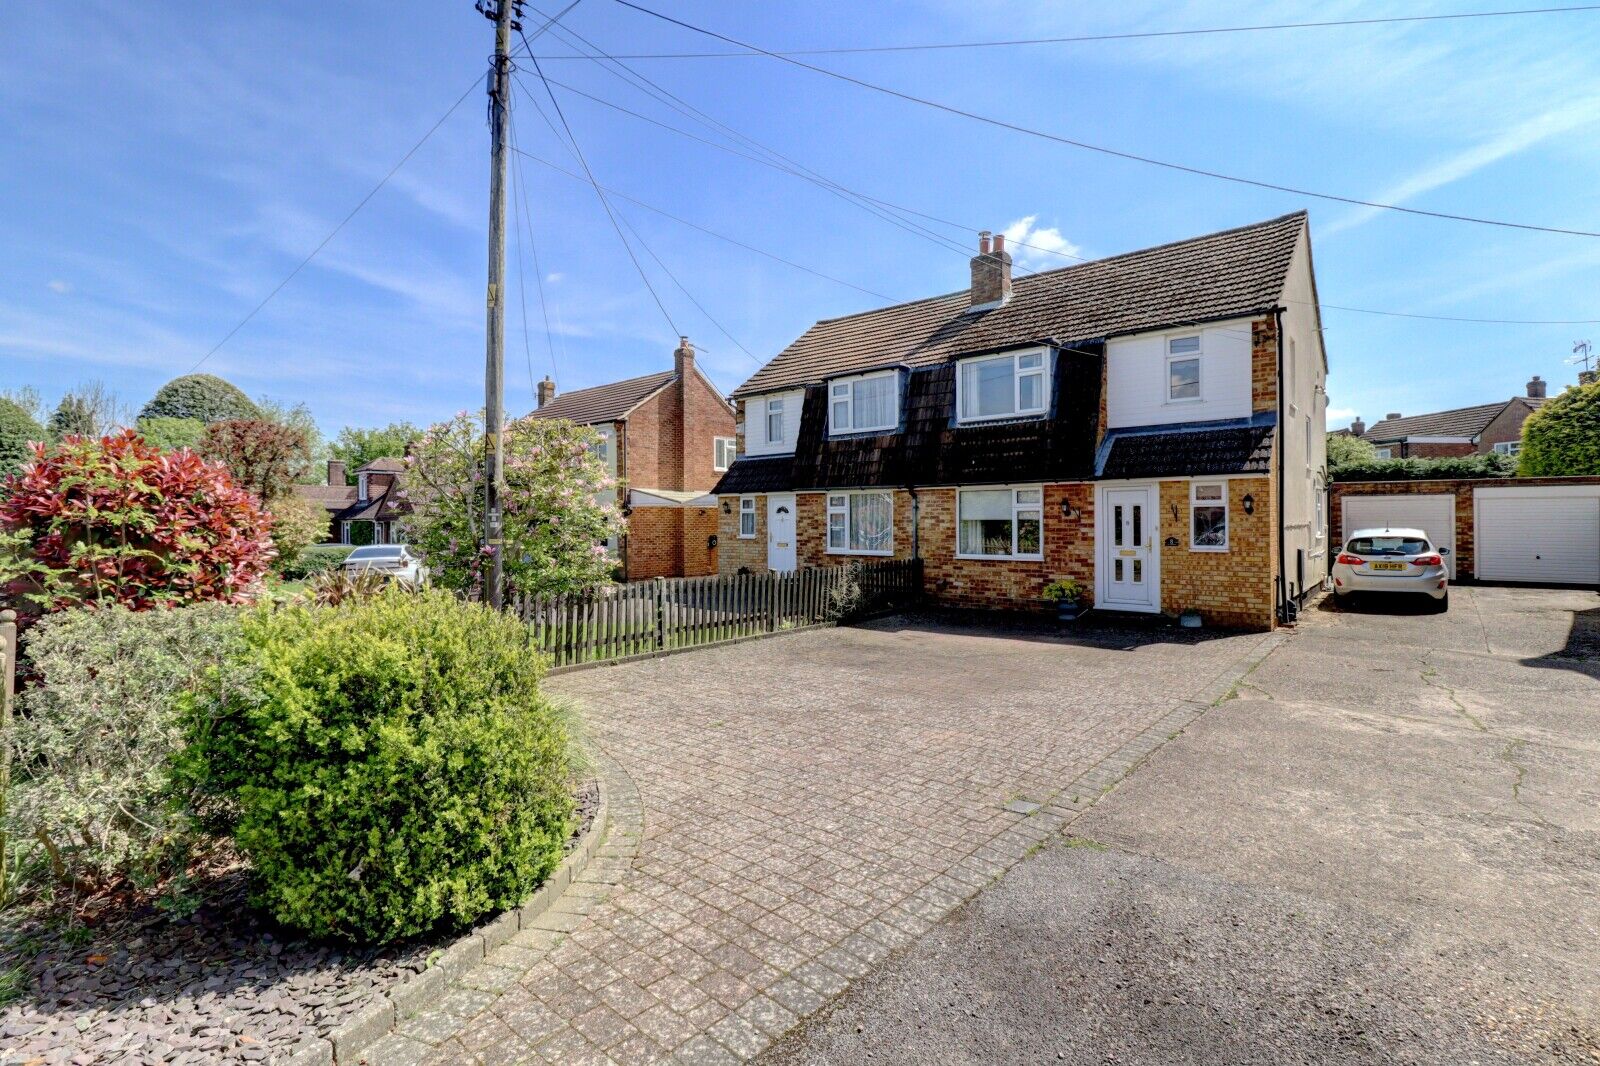 3 bedroom semi detached house for sale Penfold Lane, Holmer Green, HP15, main image